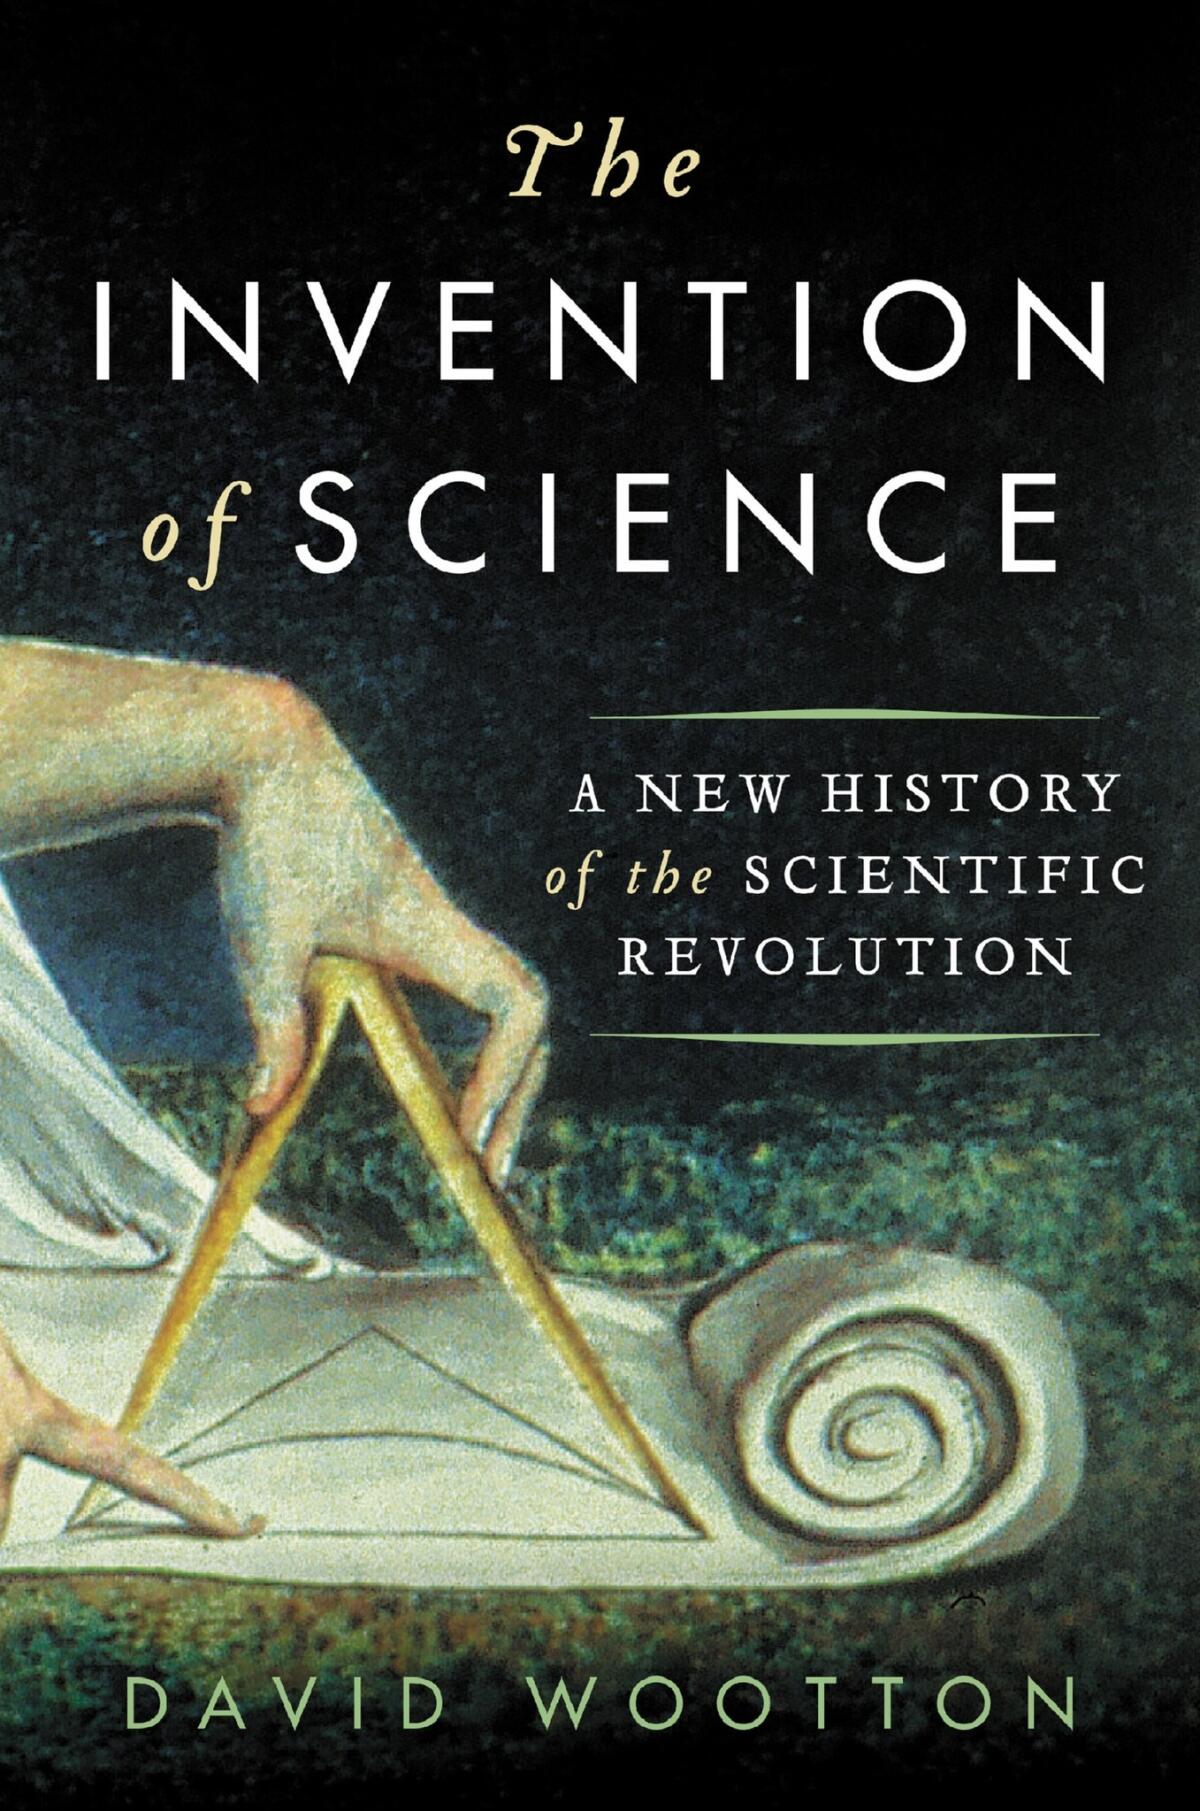 "The Invention of Science: A New History of the Scientific Revolution" by David Wootton